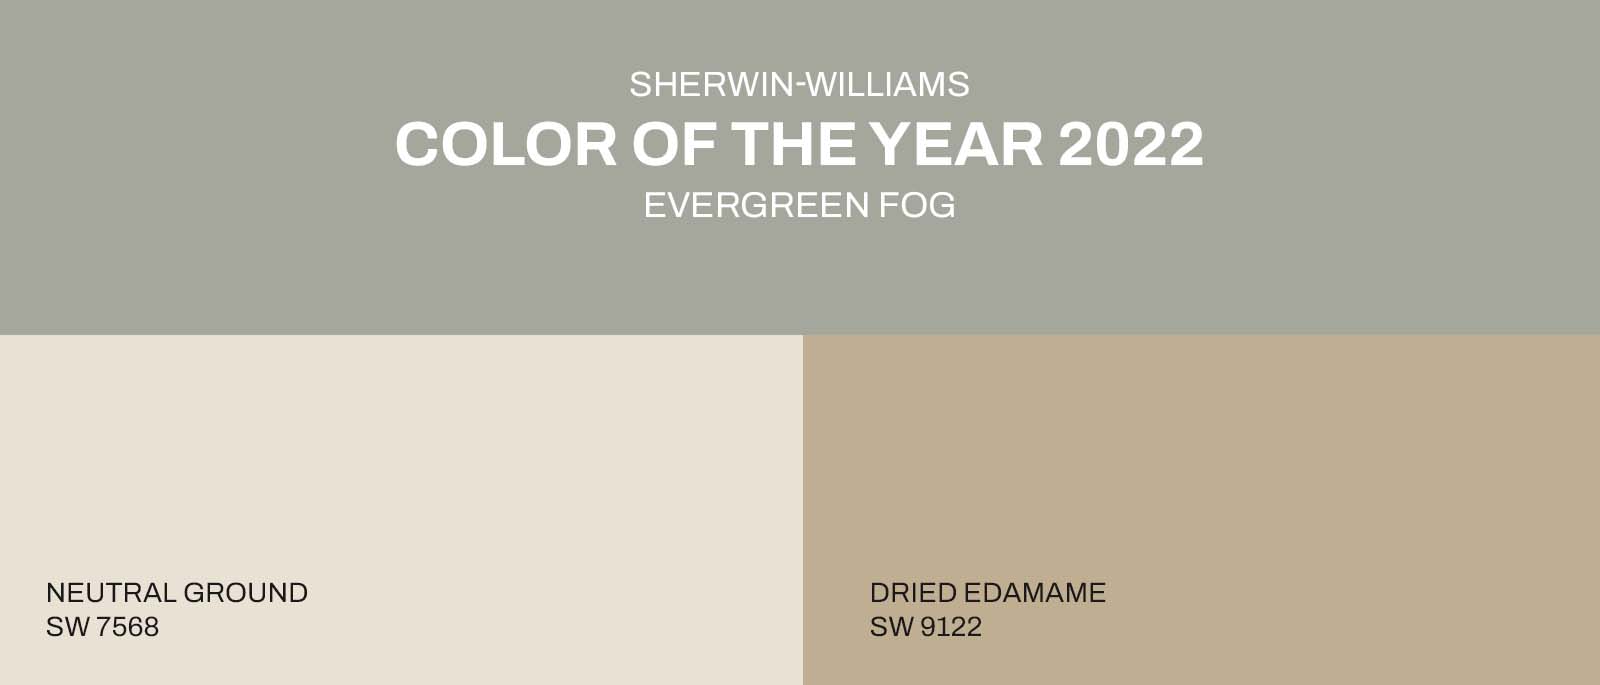 cms/blog/color_of_the_year_sherwin-williams